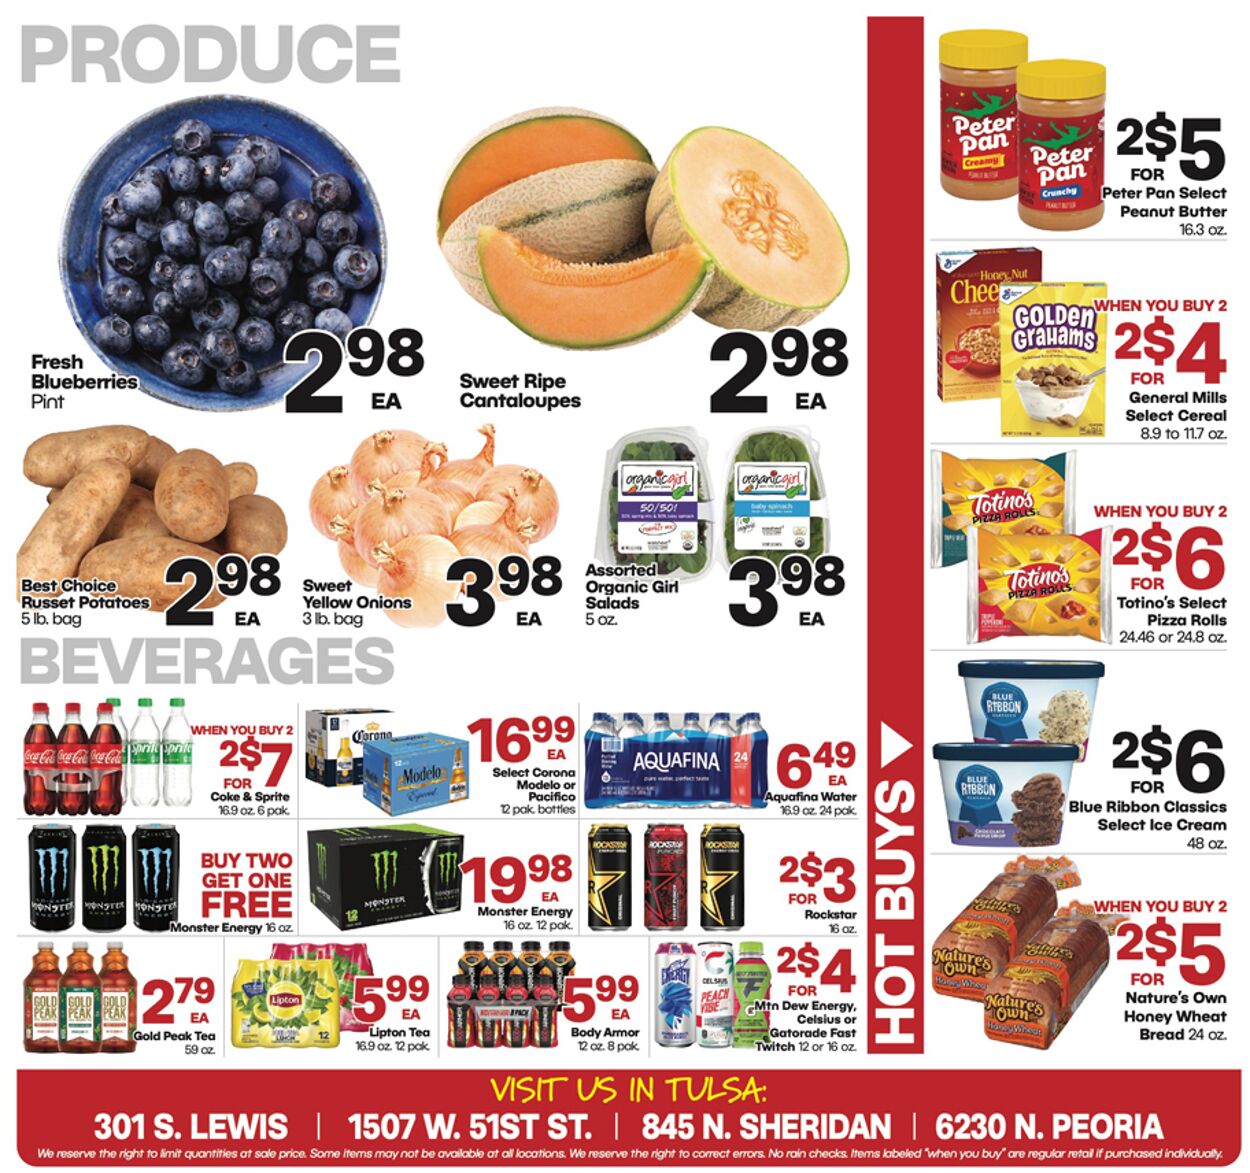 Warehouse Market Ad from 08/16/2023